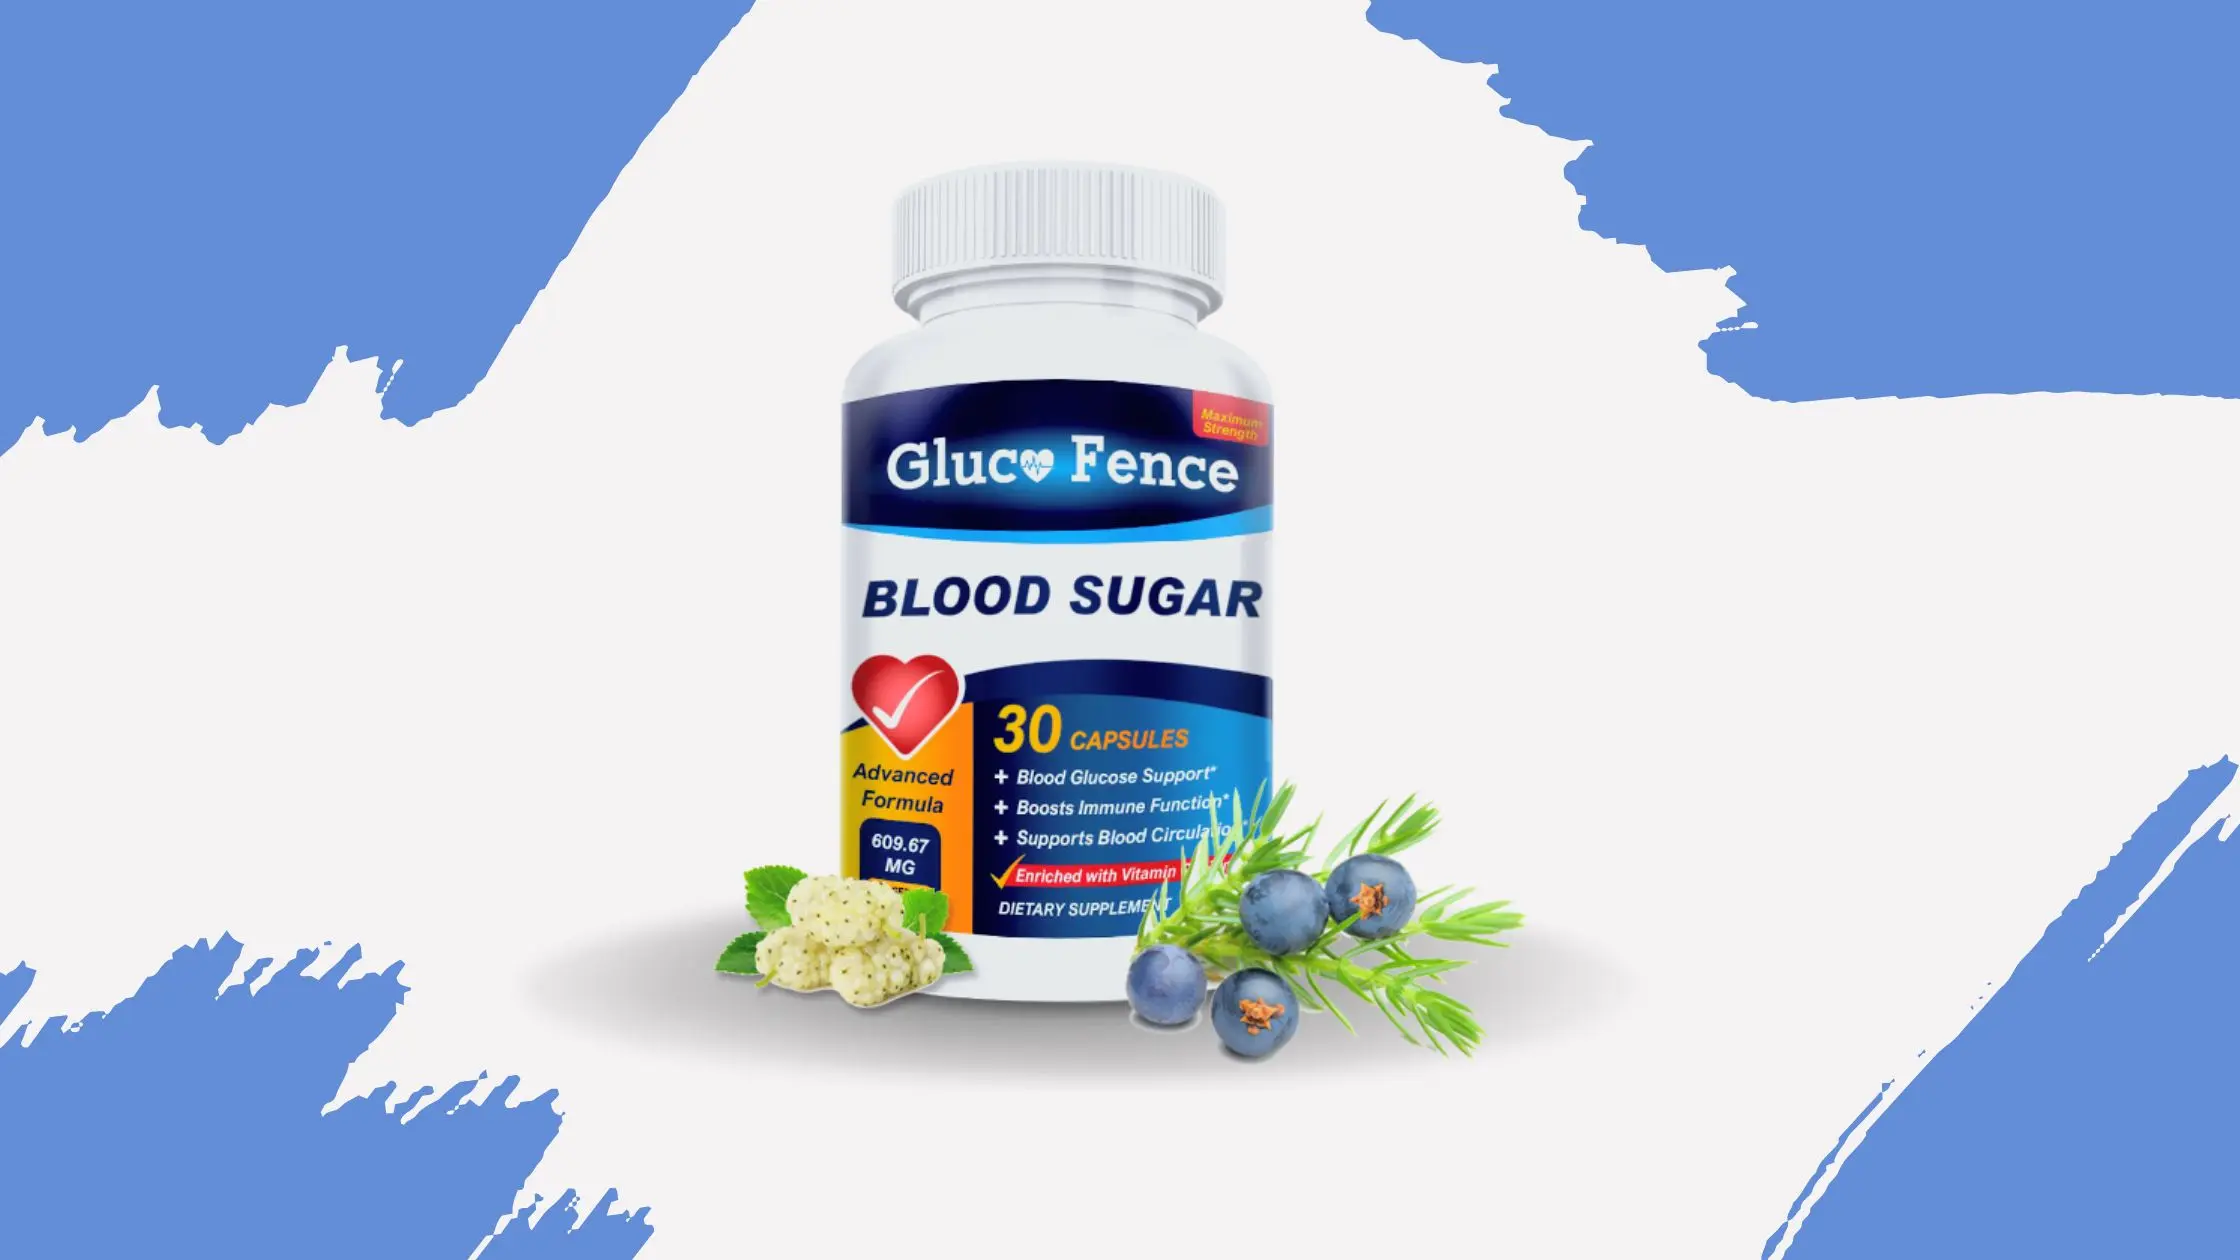 Gluco Fence Reviews: How Effective Is This Blood Sugar Supplement?